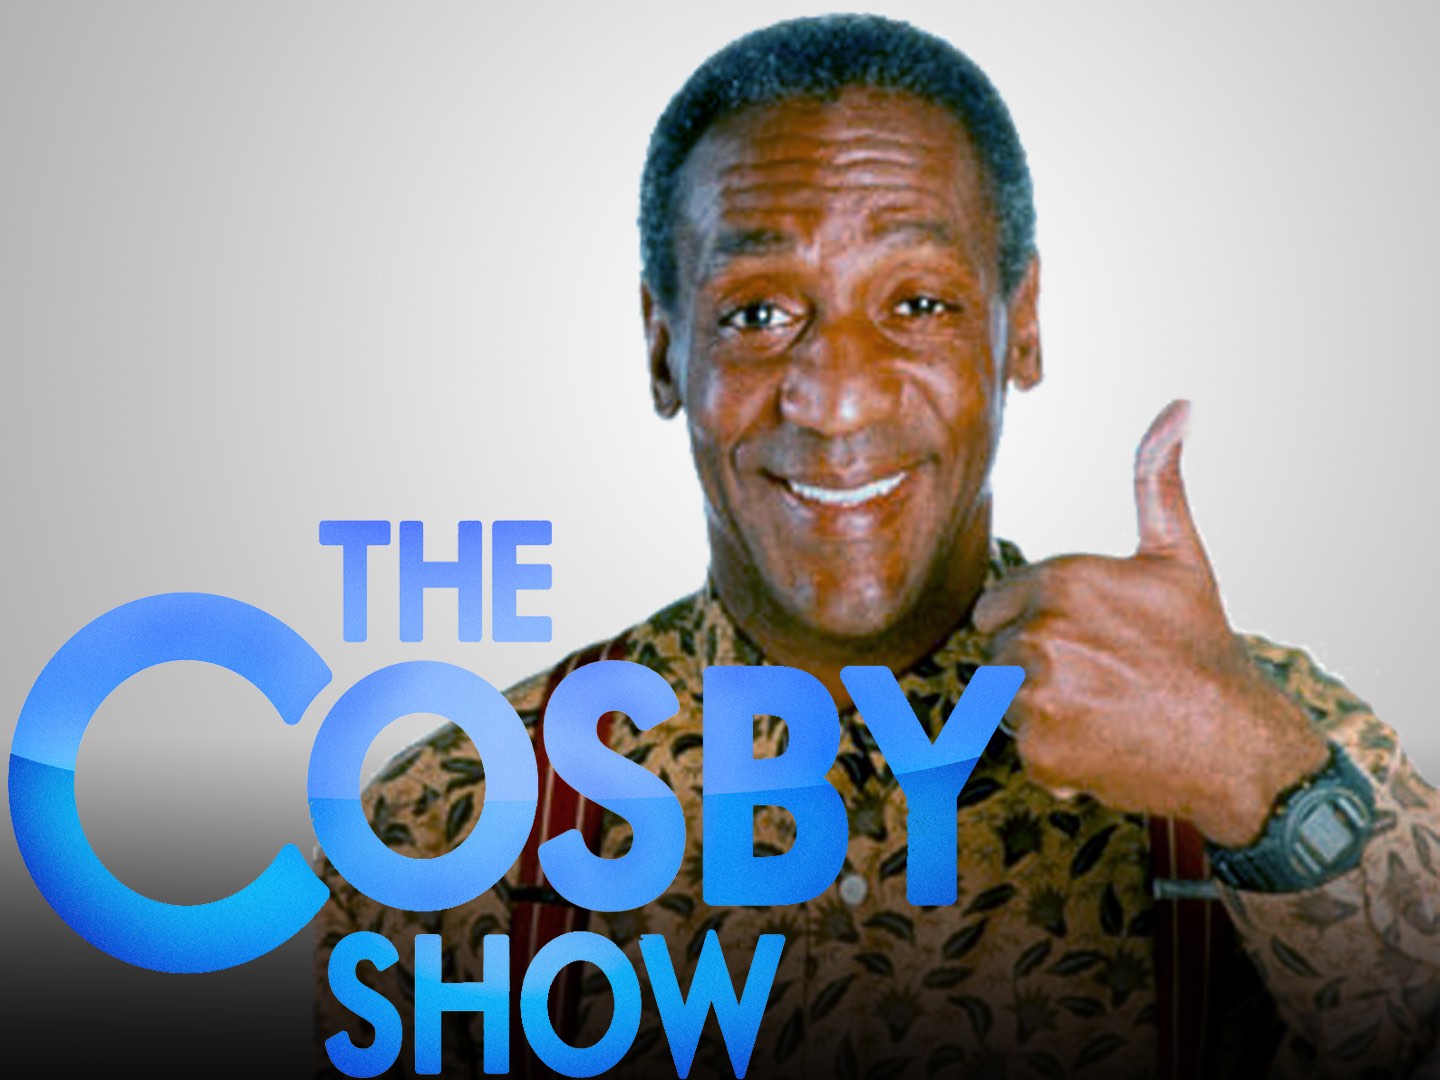 What Does Your Taste in Classic TV Shows Say About You? The Cosby Show